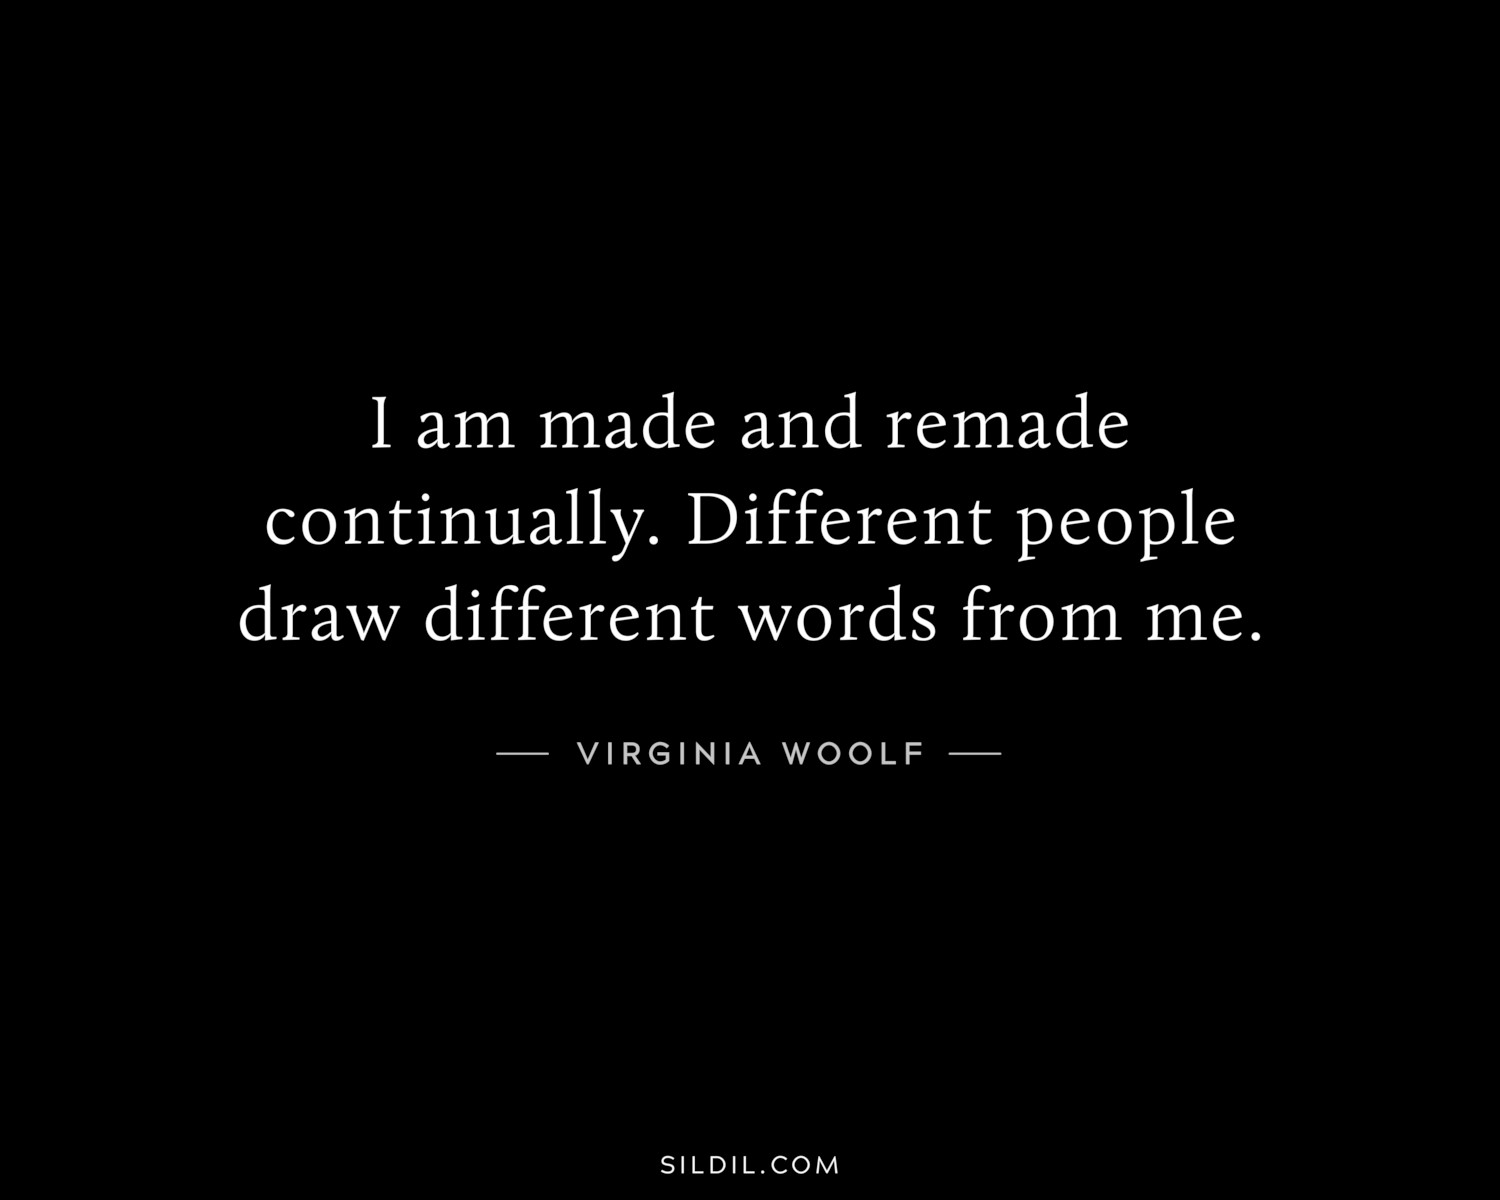 I am made and remade continually. Different people draw different words from me.